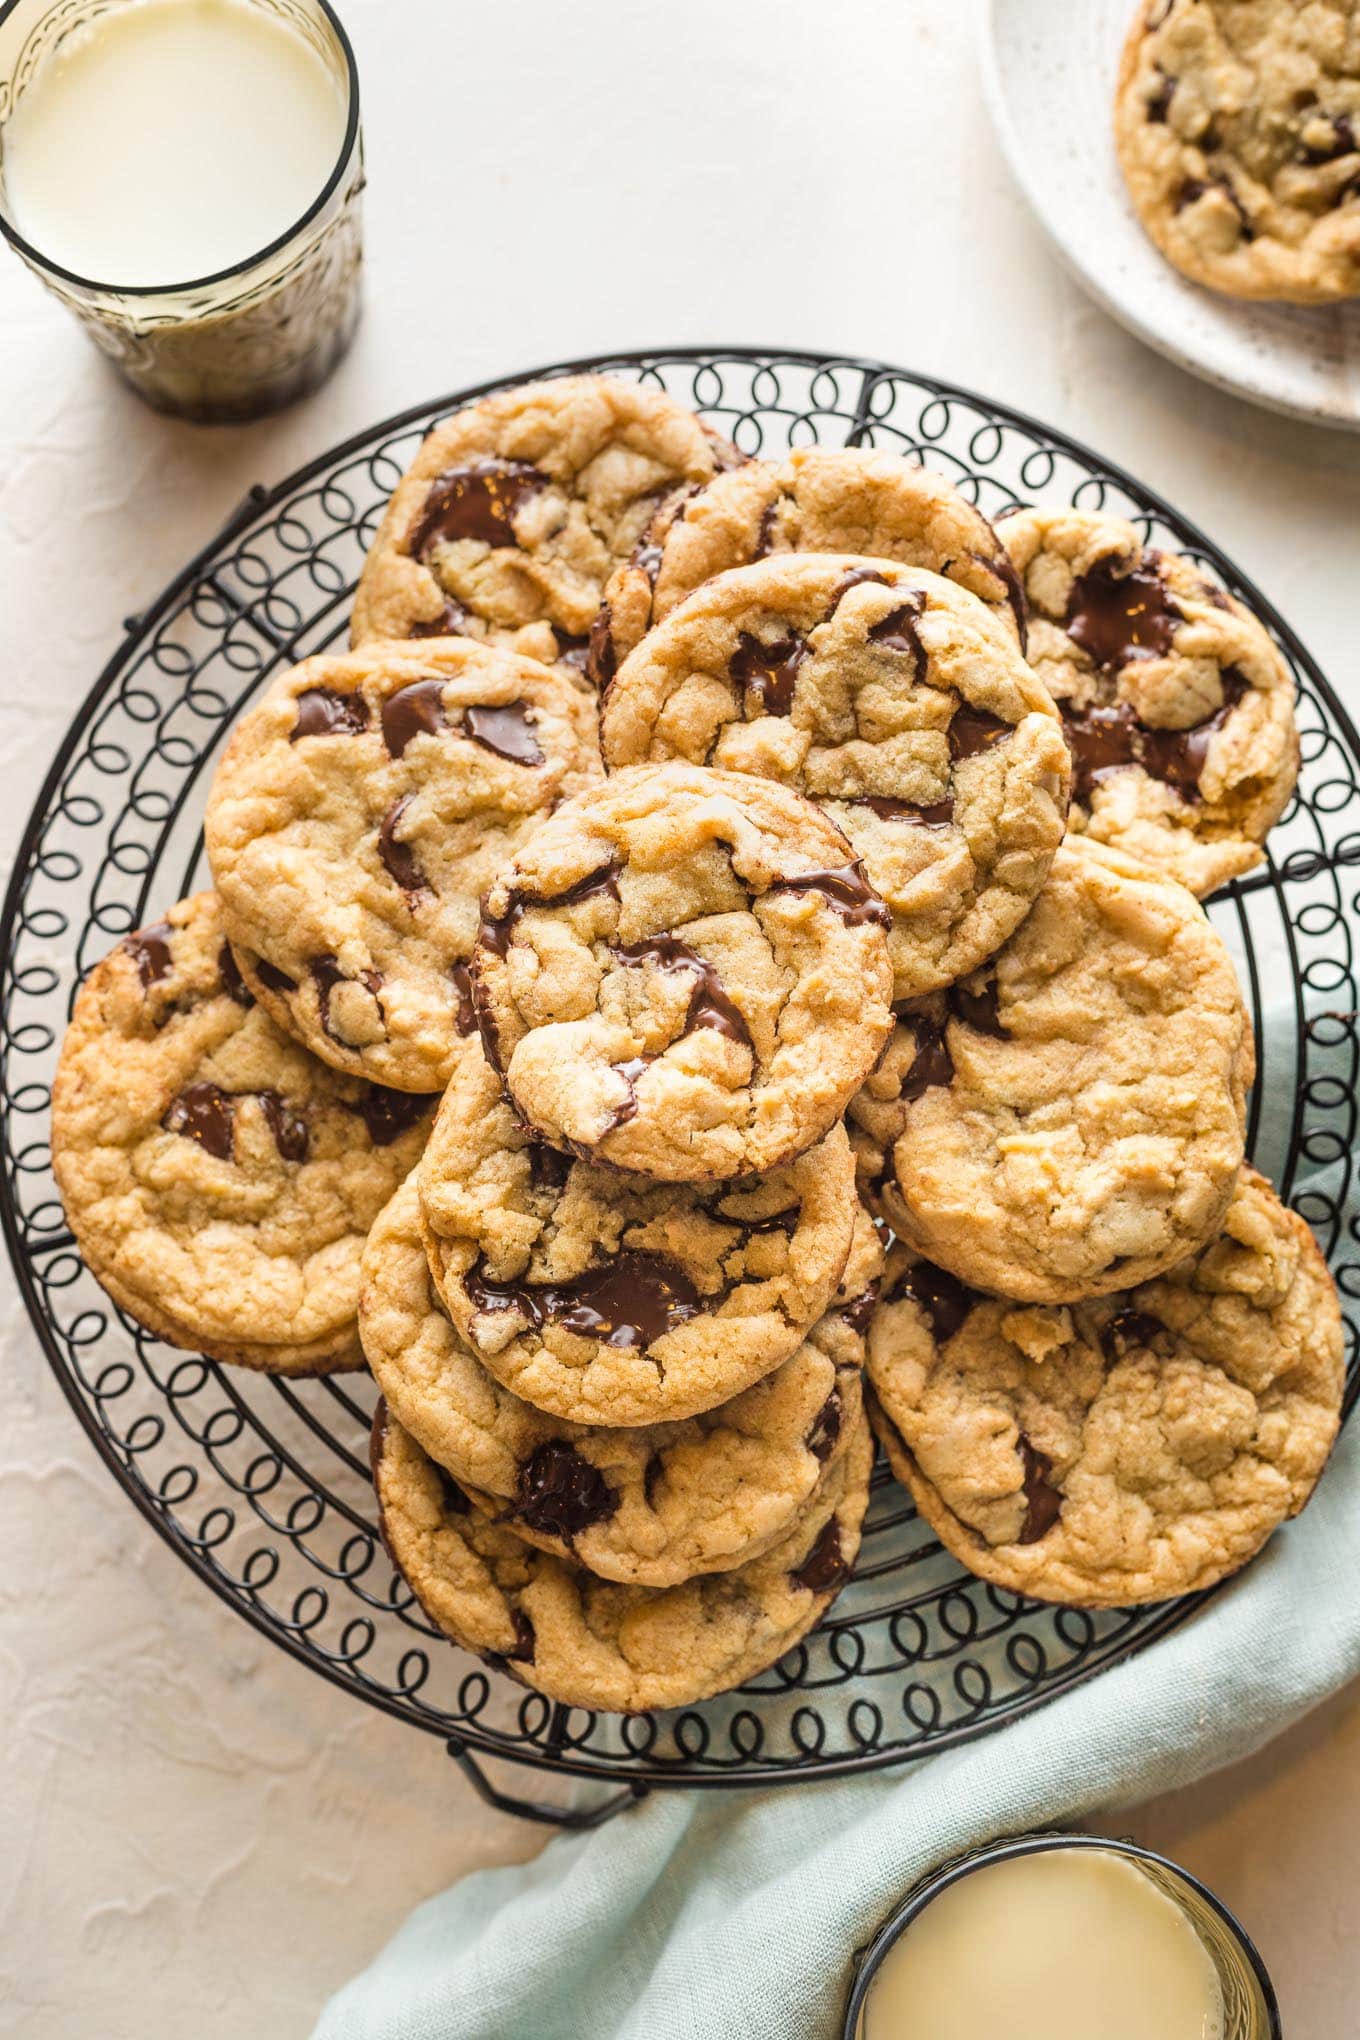 https://www.nourish-and-fete.com/wp-content/uploads/2017/01/bakery-style-chocolate-chip-cookies-5.jpg